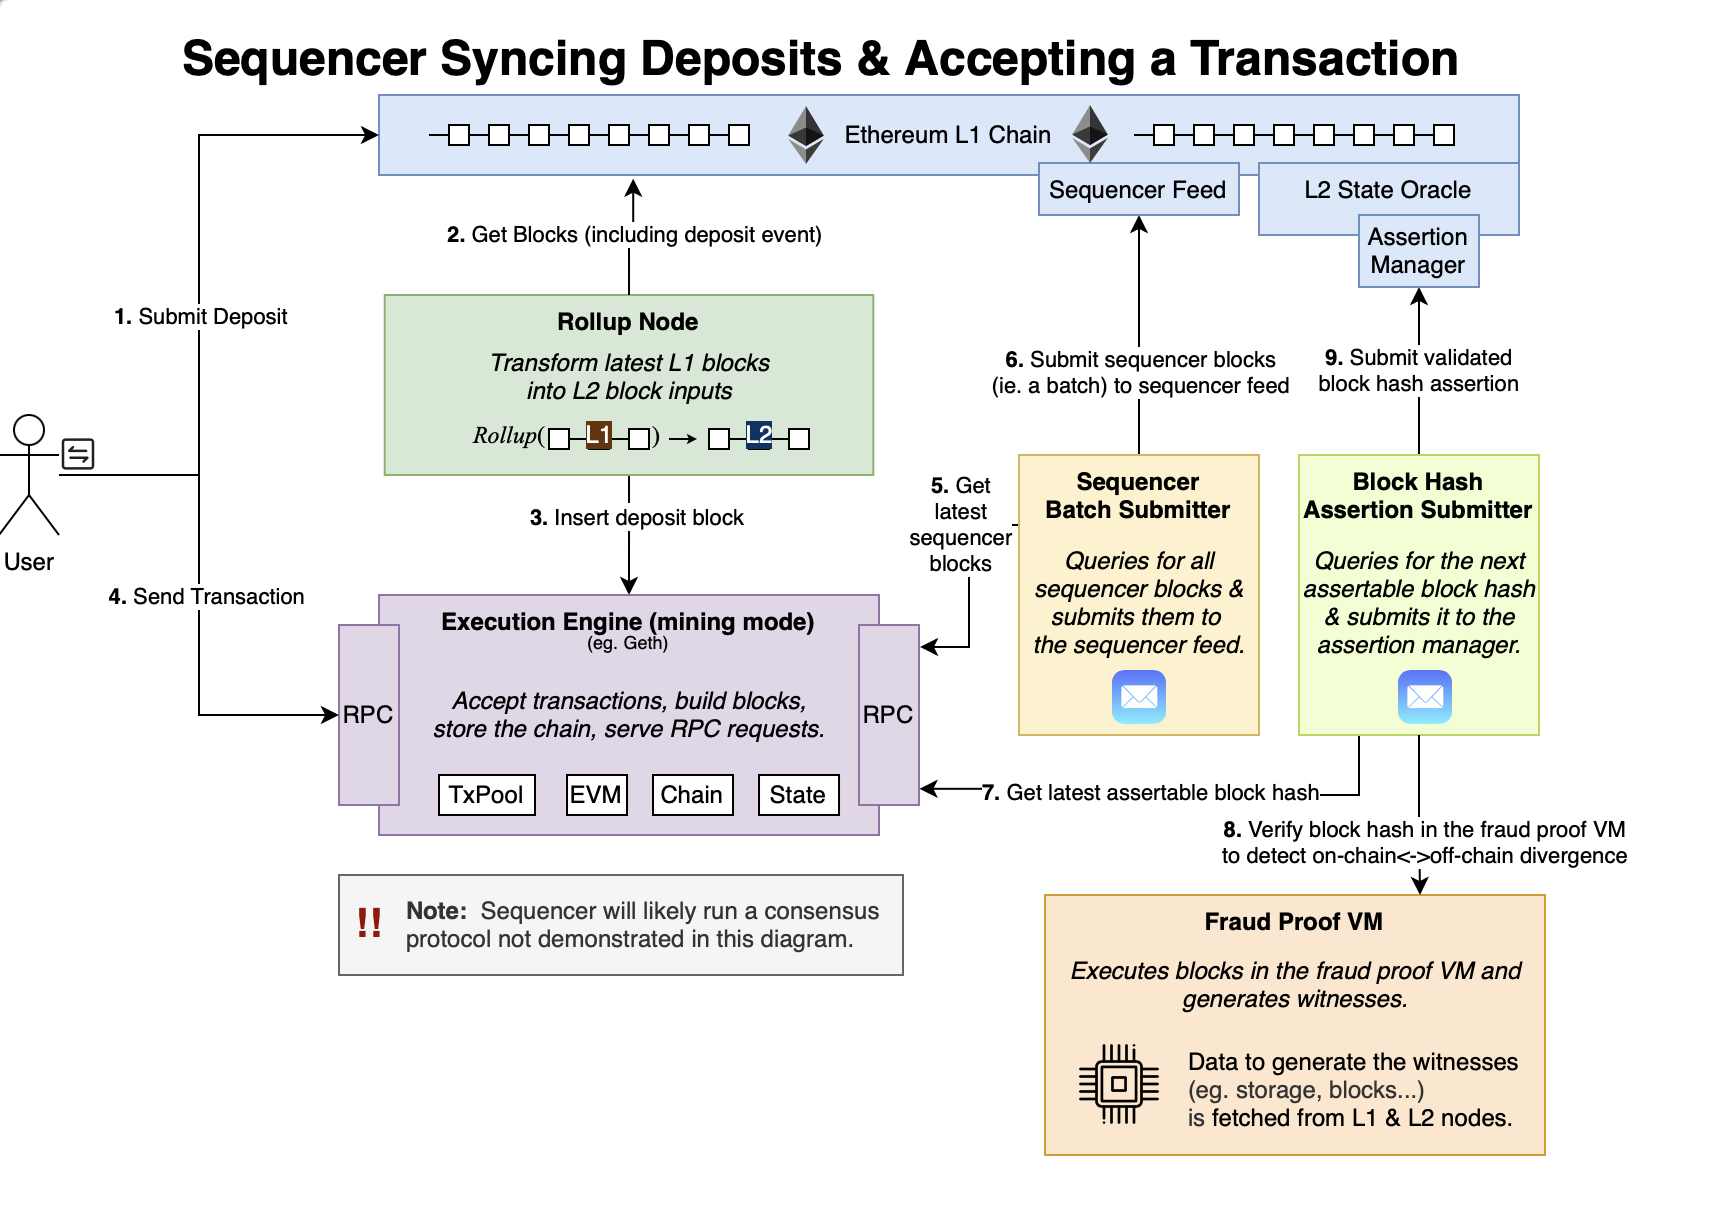 Sequencer Syncing Deposits & Accepting a Transaction